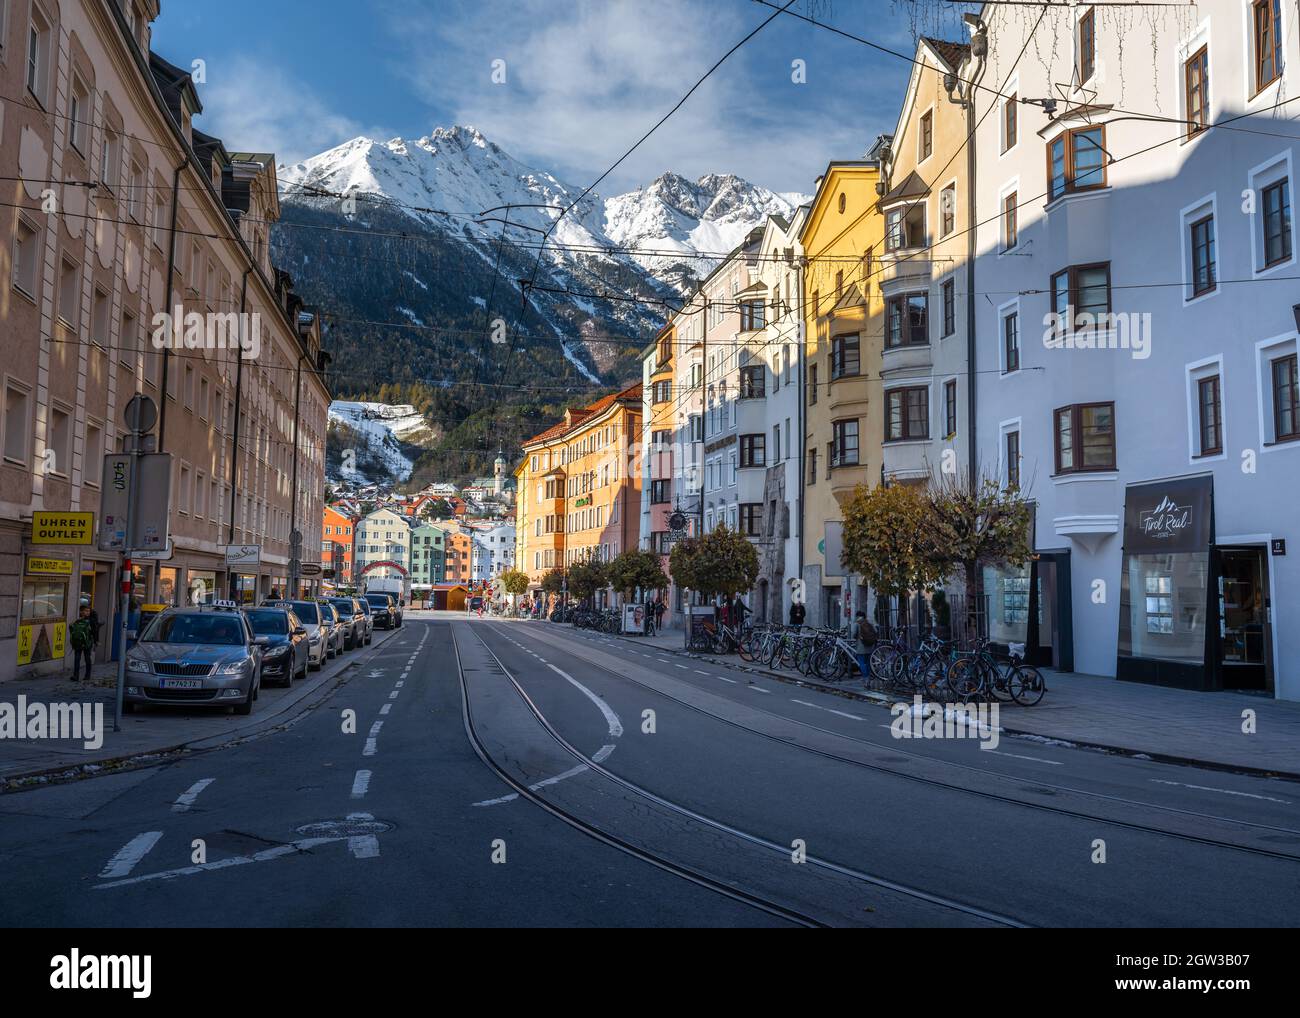 Street view of Innsbruck Old Town with Alps Mountains on background - Innsbruck, Tyrol, Austria Stock Photo